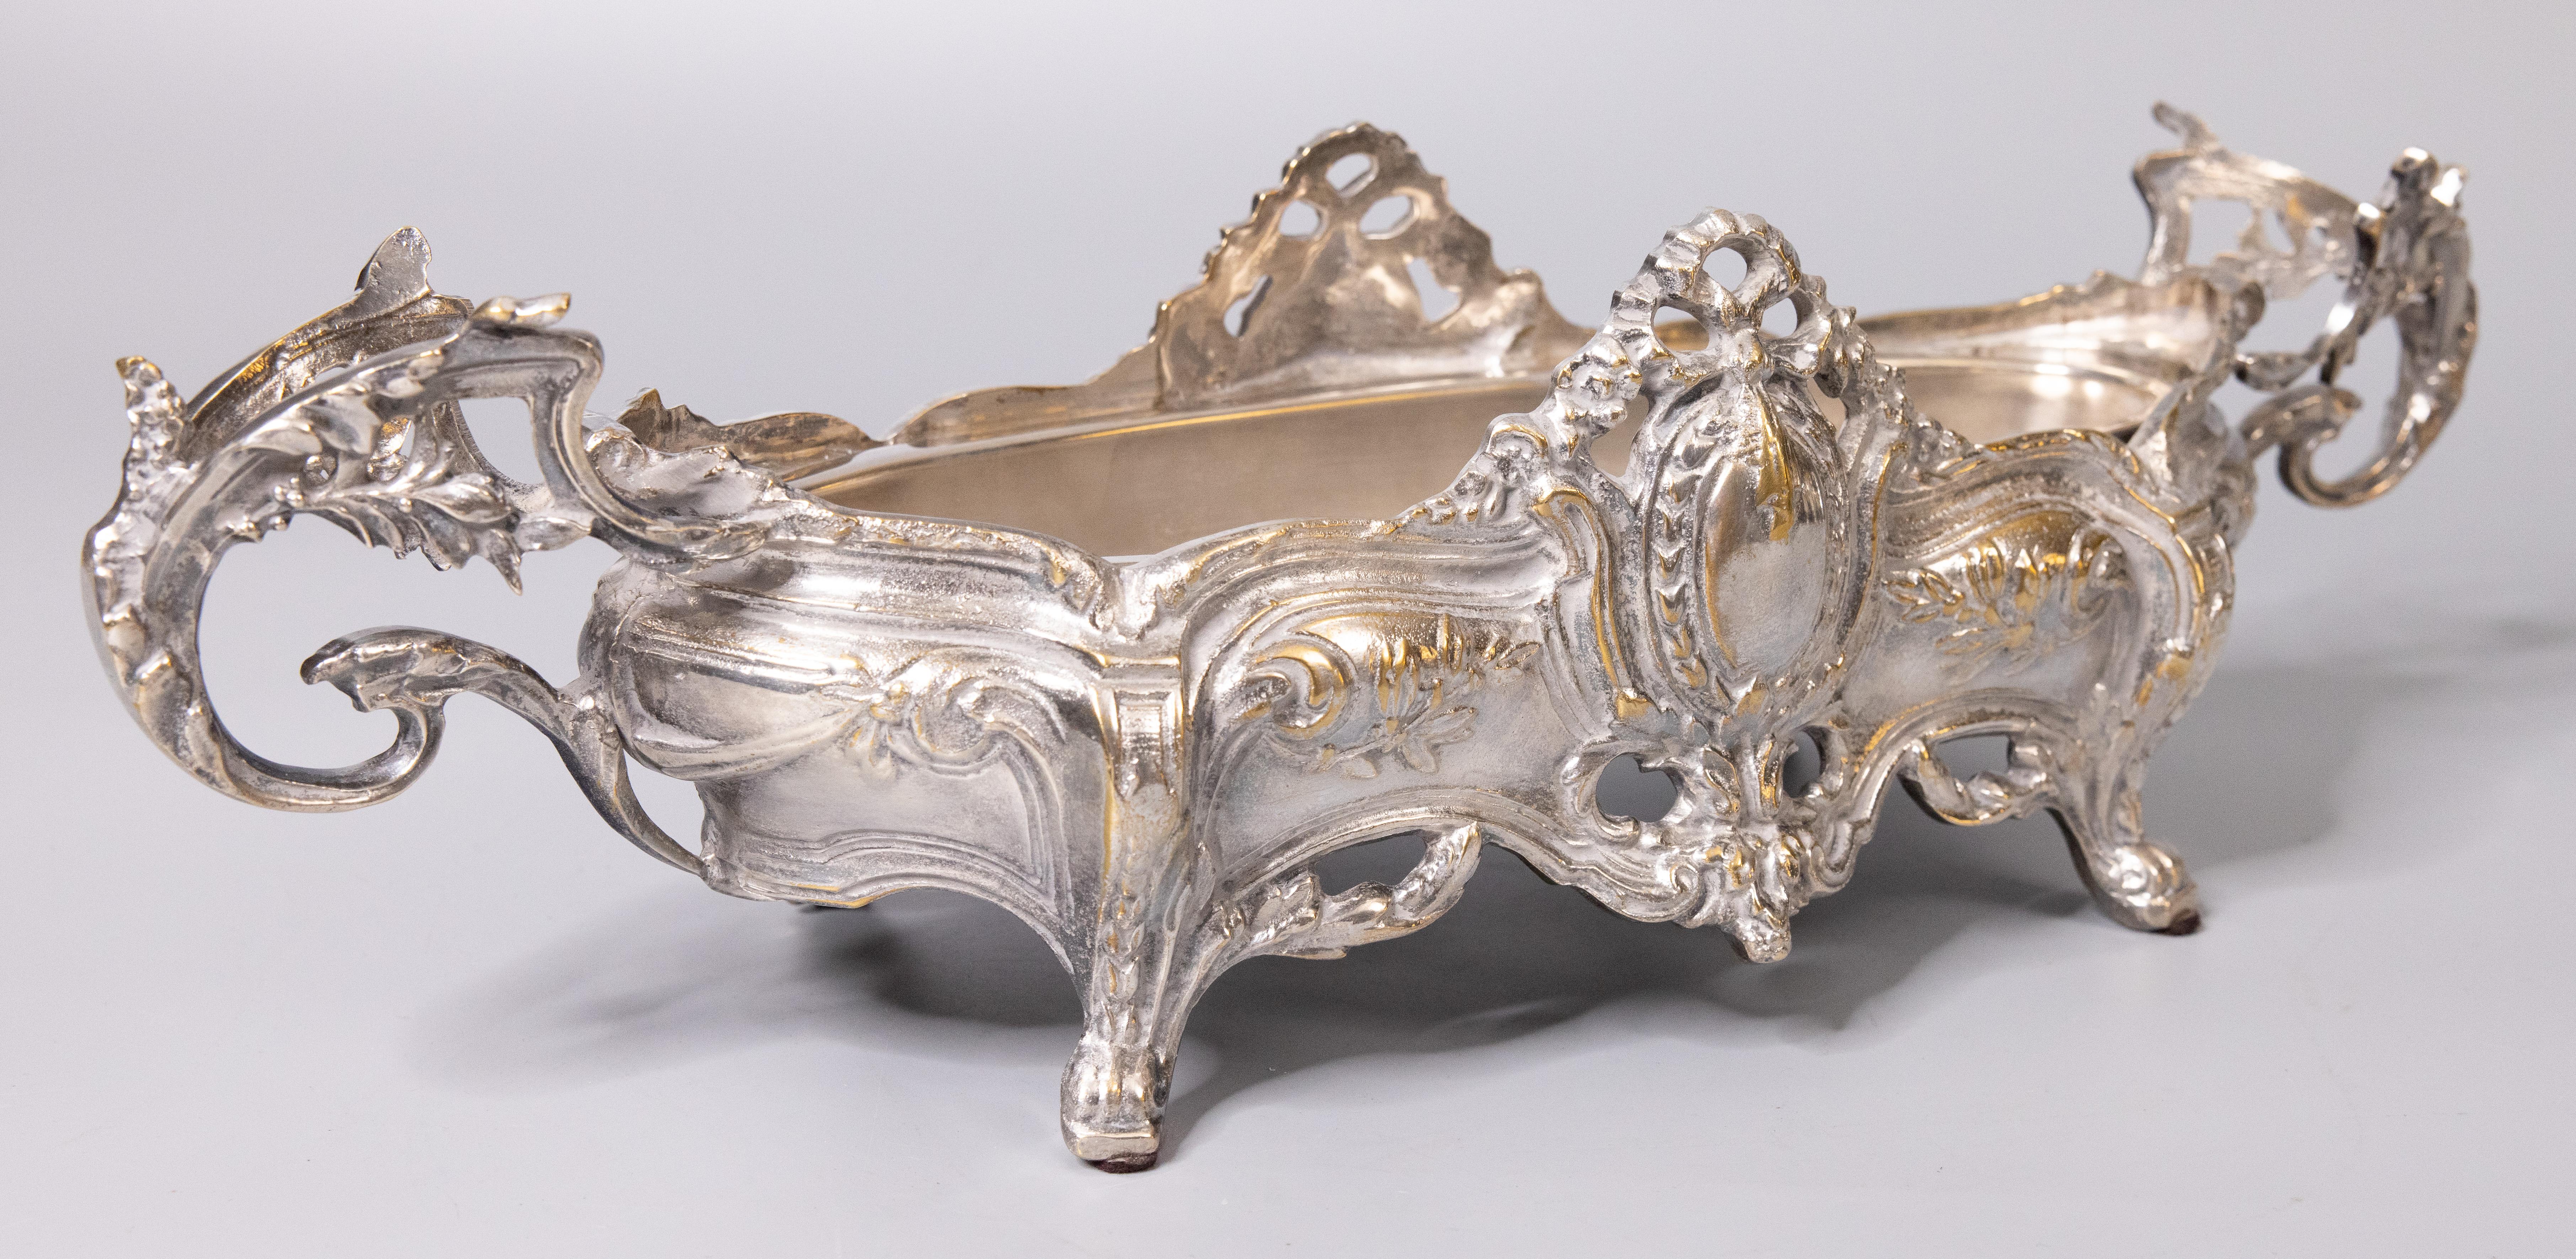 A gorgeous antique French Louis XV style silverplate footed cache pot / jardiniere / planter with the original removable silverplated liner, circa 1900. No maker's mark. This stunning cachepot is a nice large size and heavy, weighing an impressive 7